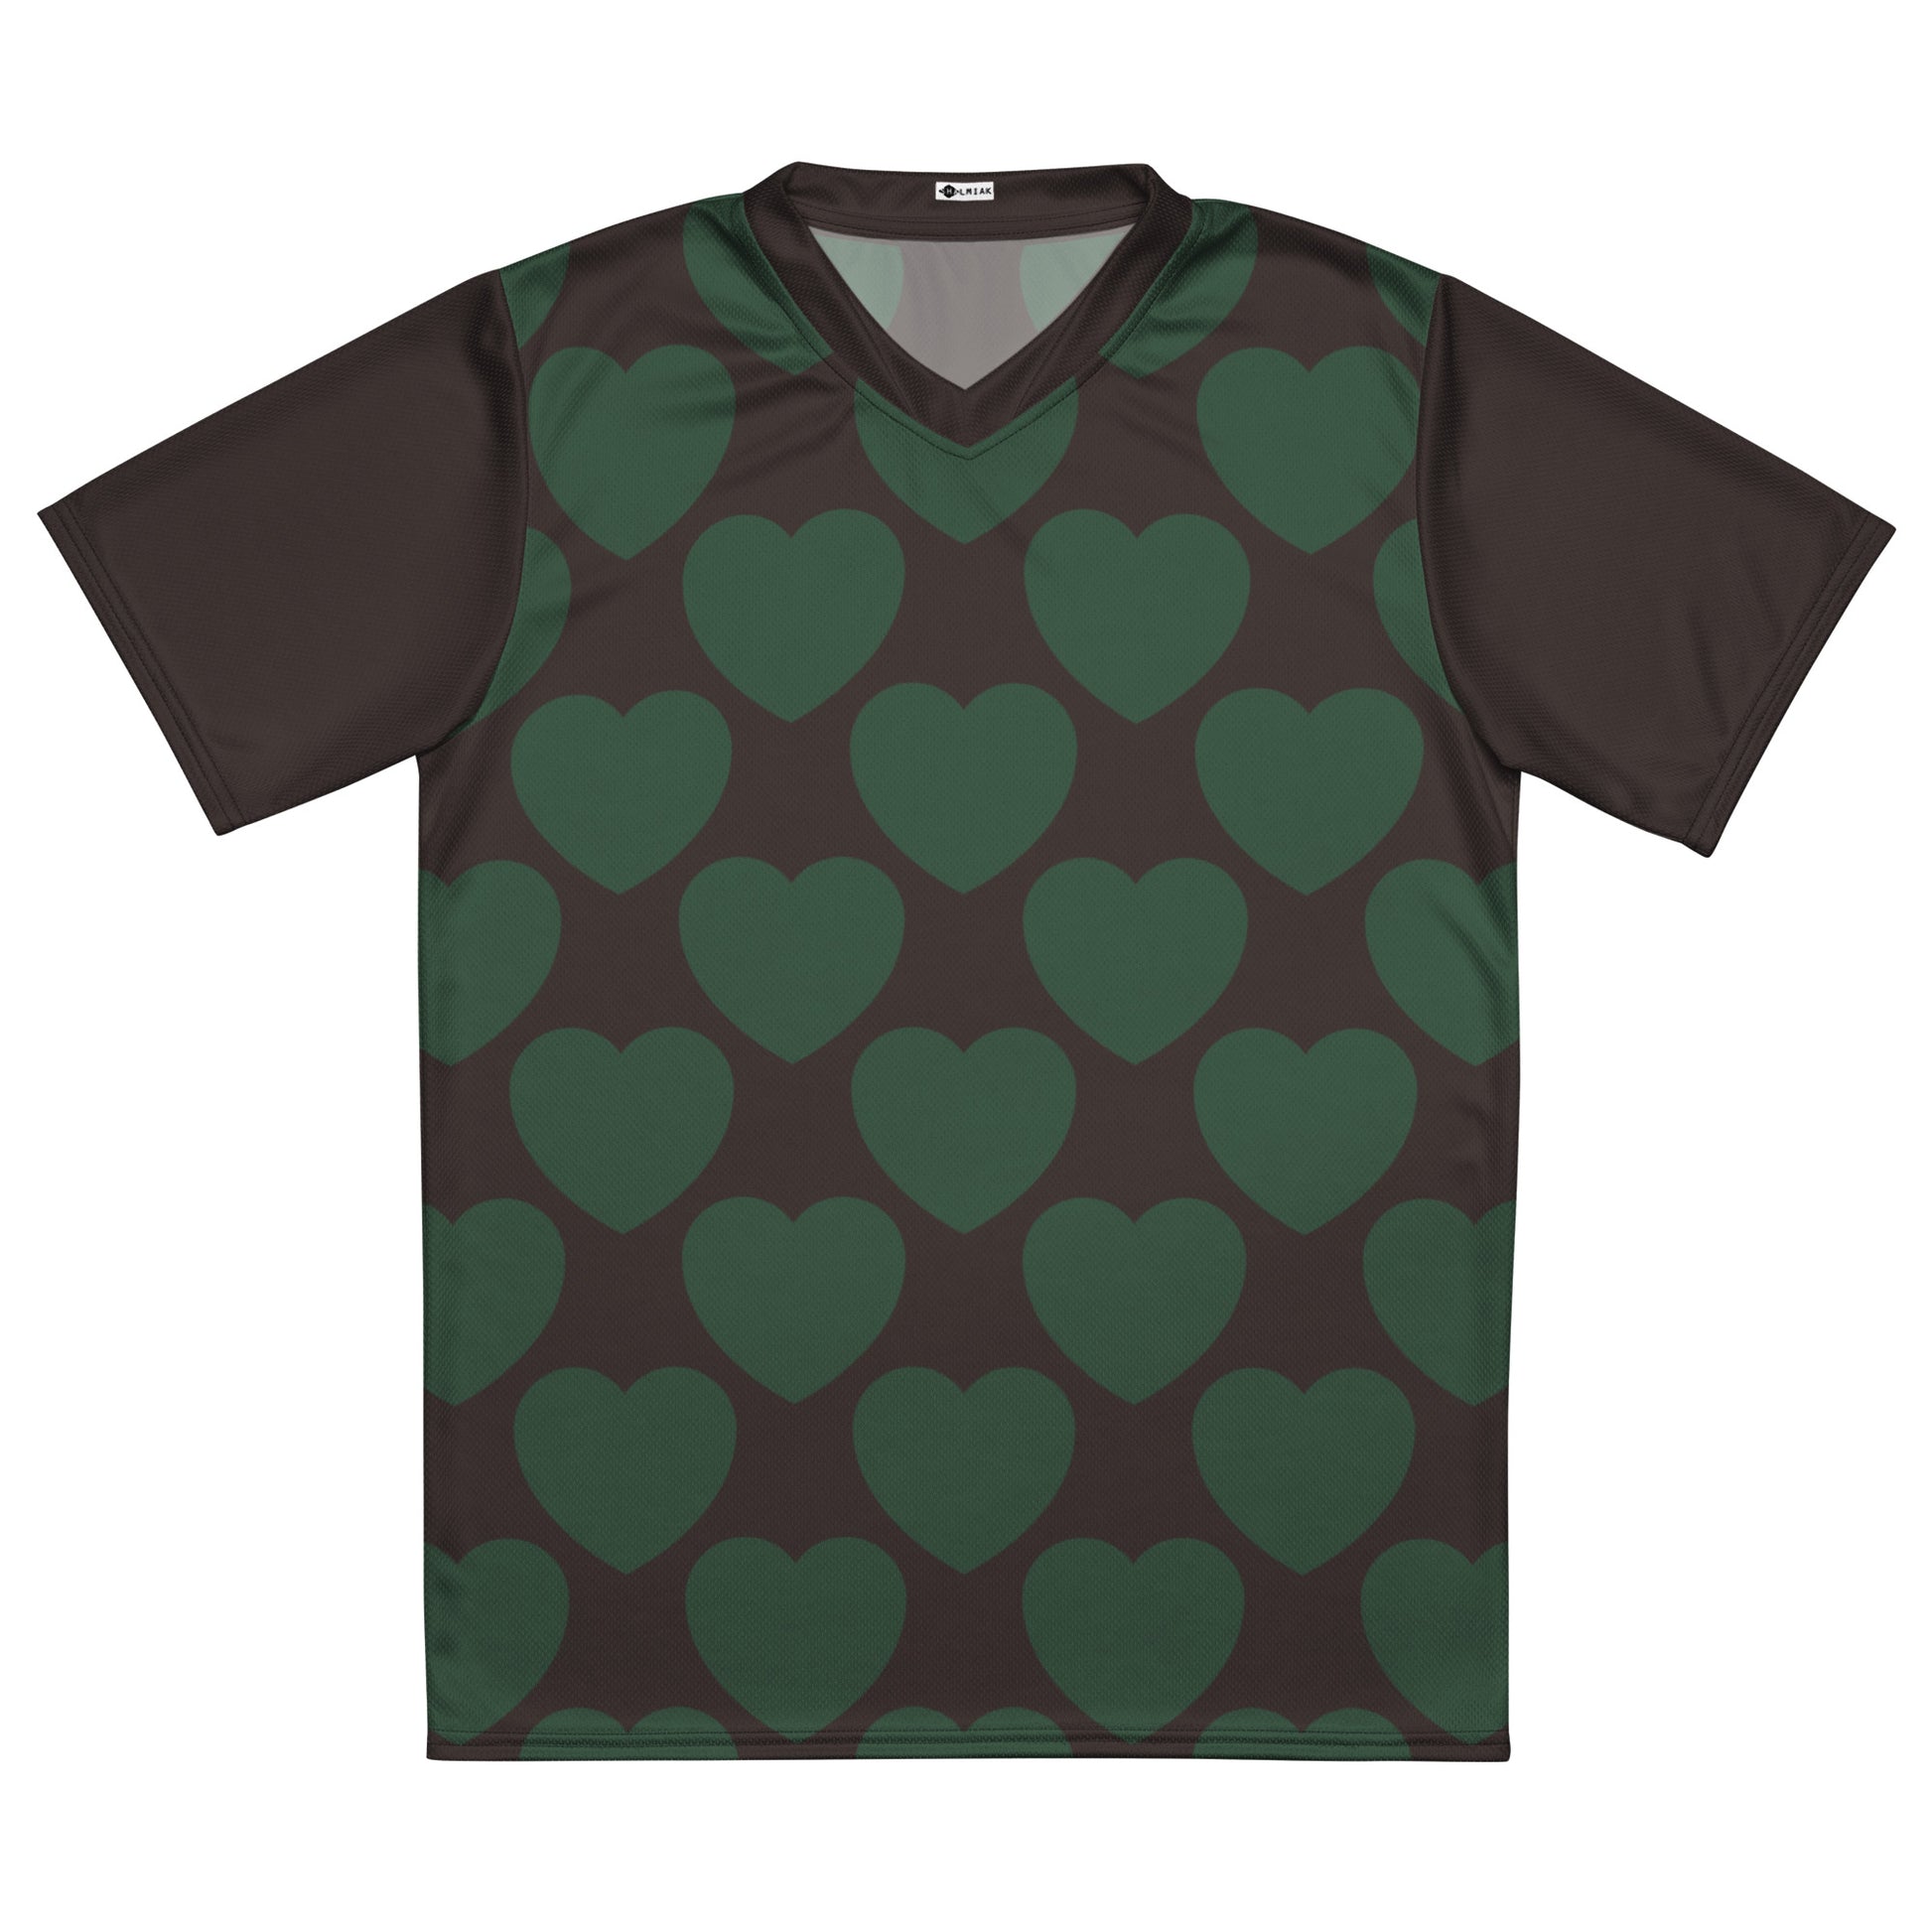 ELLIE LOVE forest - Recycled unisex sports jersey